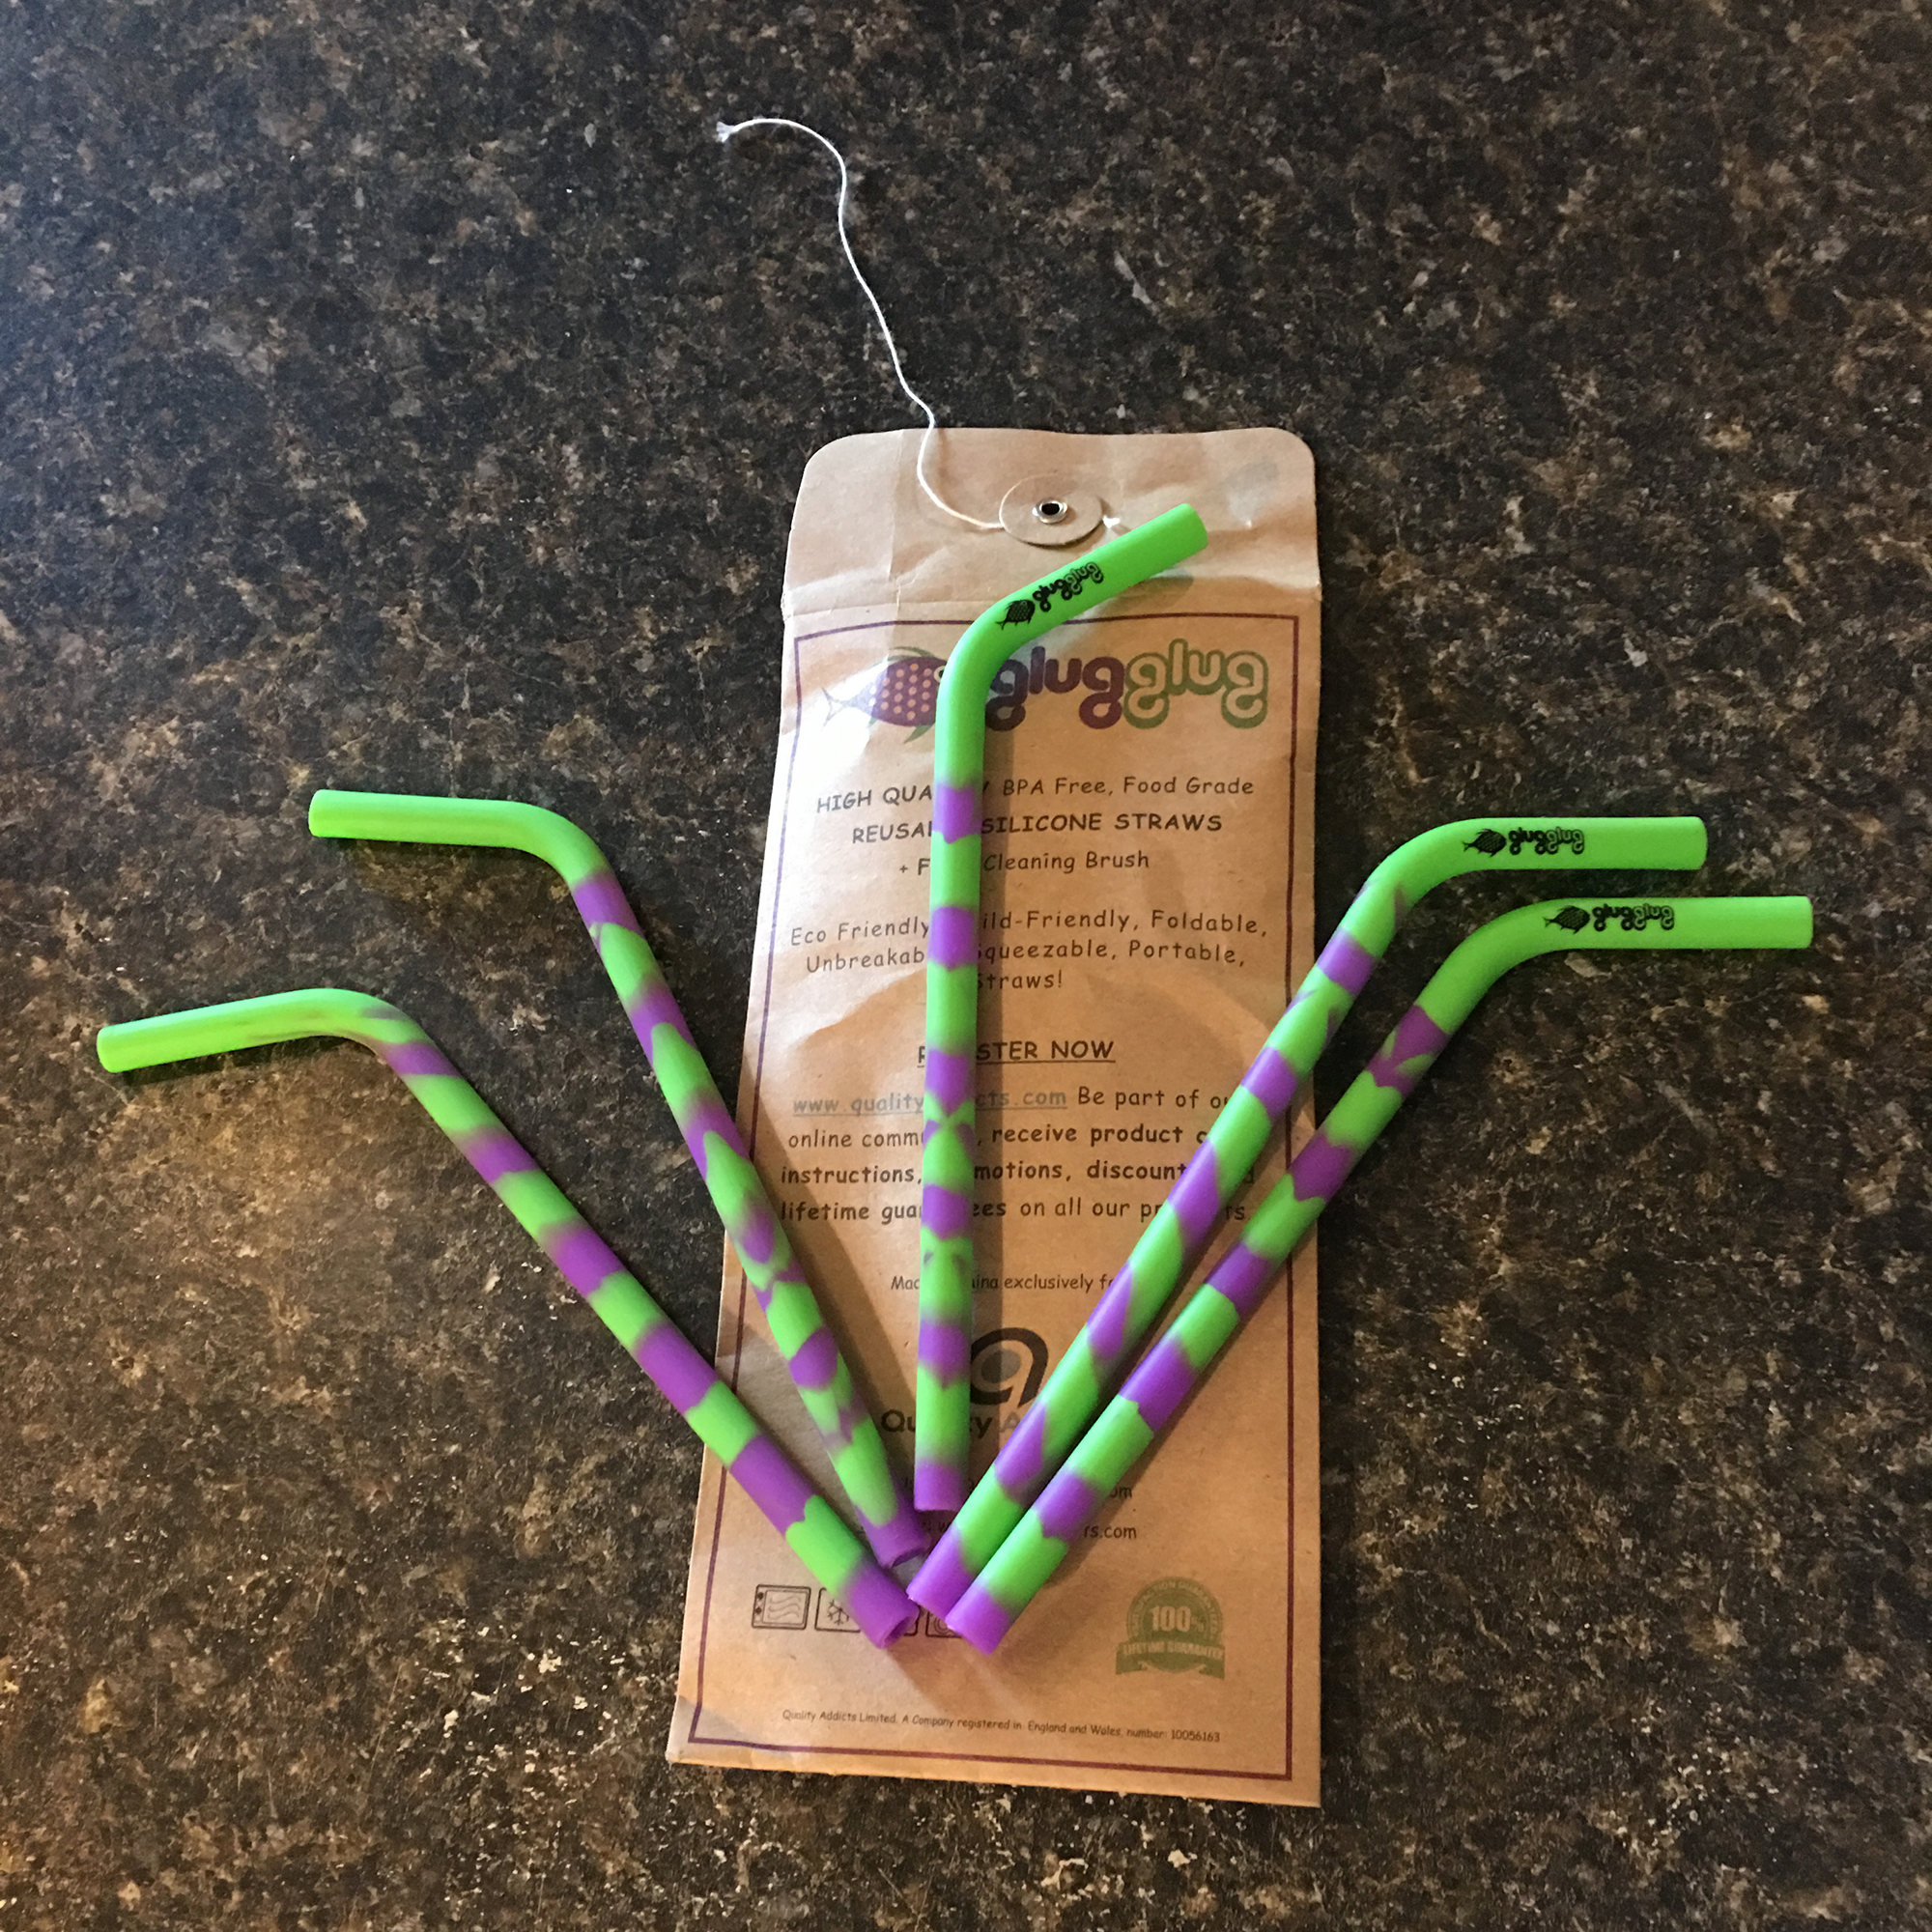 GlugGlug silicone bendy straws for people with disabilities, reusable and environmentally friendly.